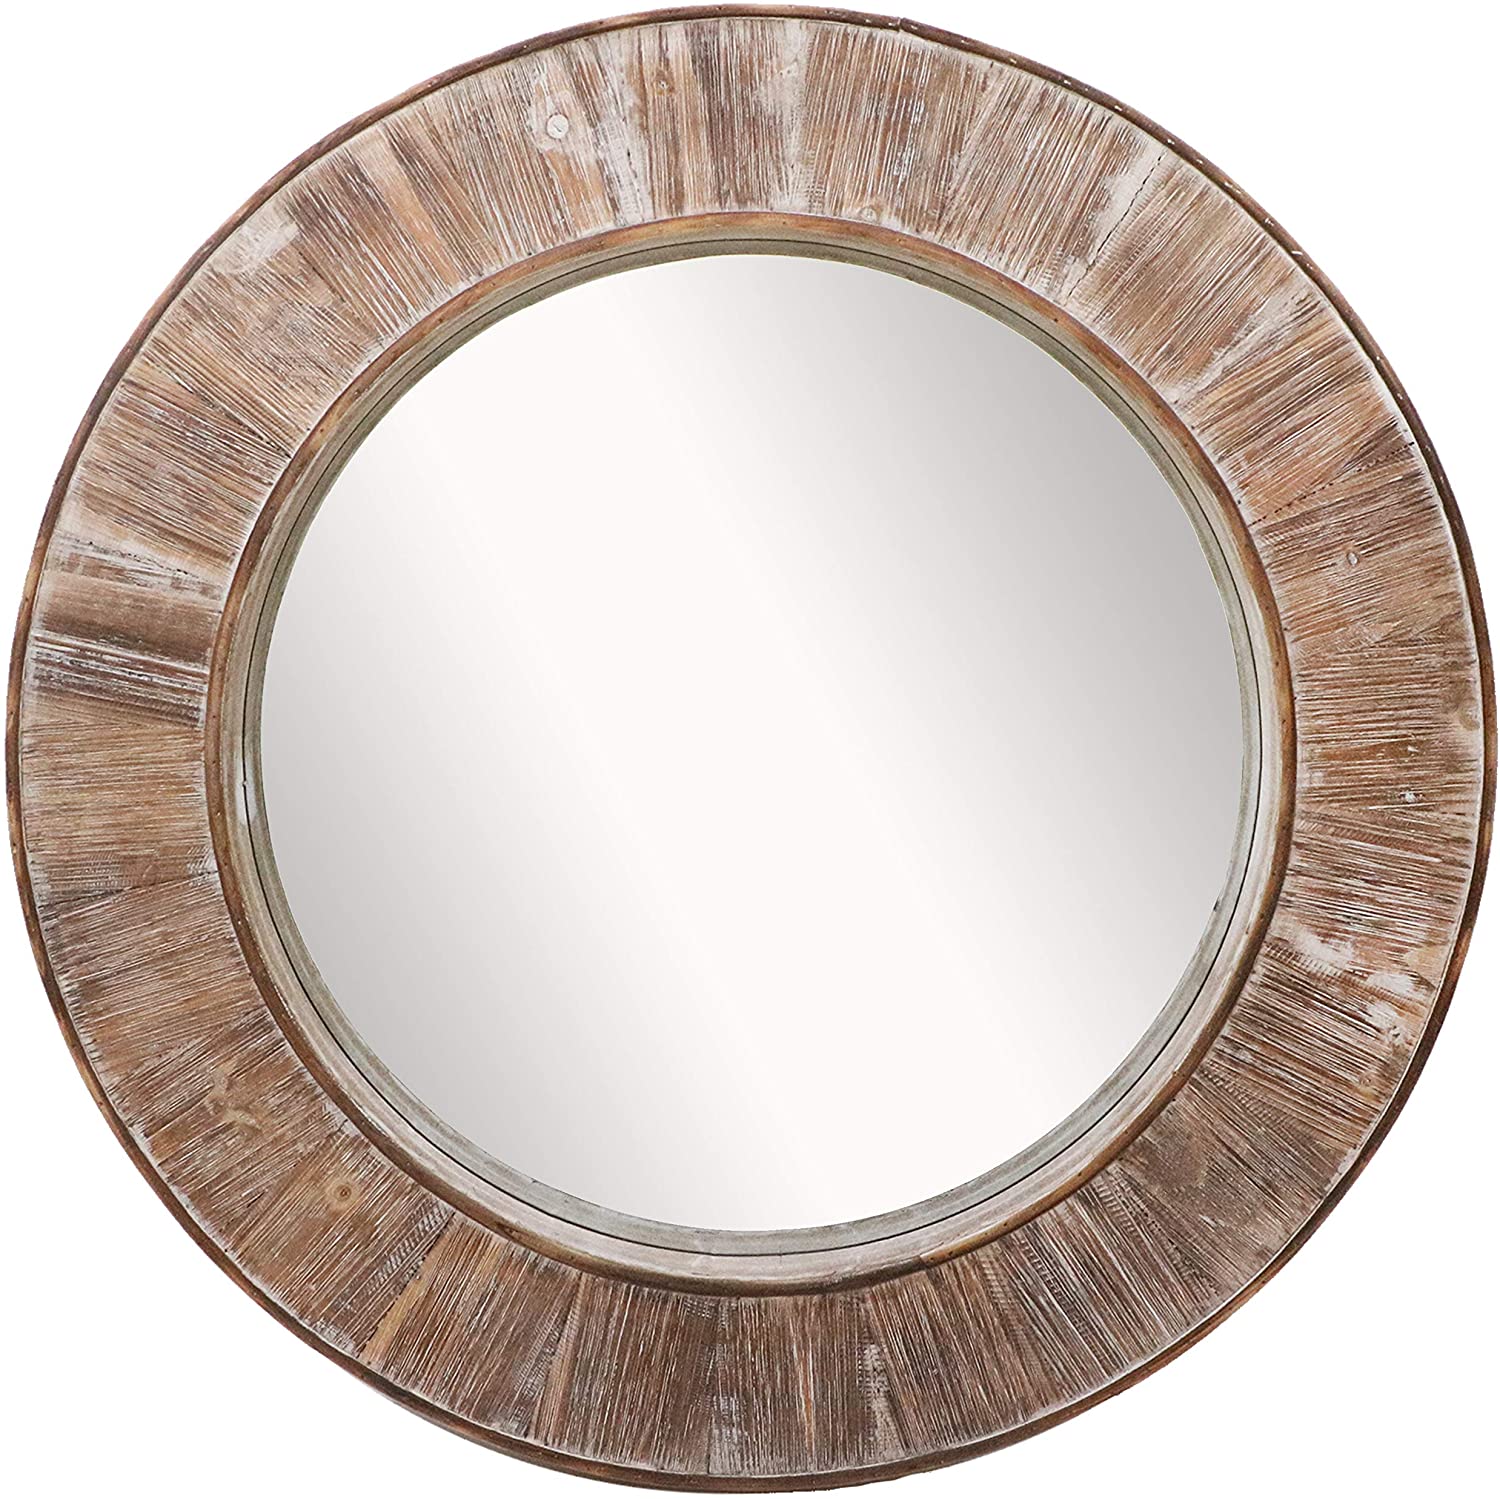 Barnyard Designs Round Decorative Wall Hanging Mirror Large Wooden Circle Frame Rustic Distressed Wood Farmhouse Mirror For Bedroom Bathroom Or Living Room Wall Decor 31.5” 1 